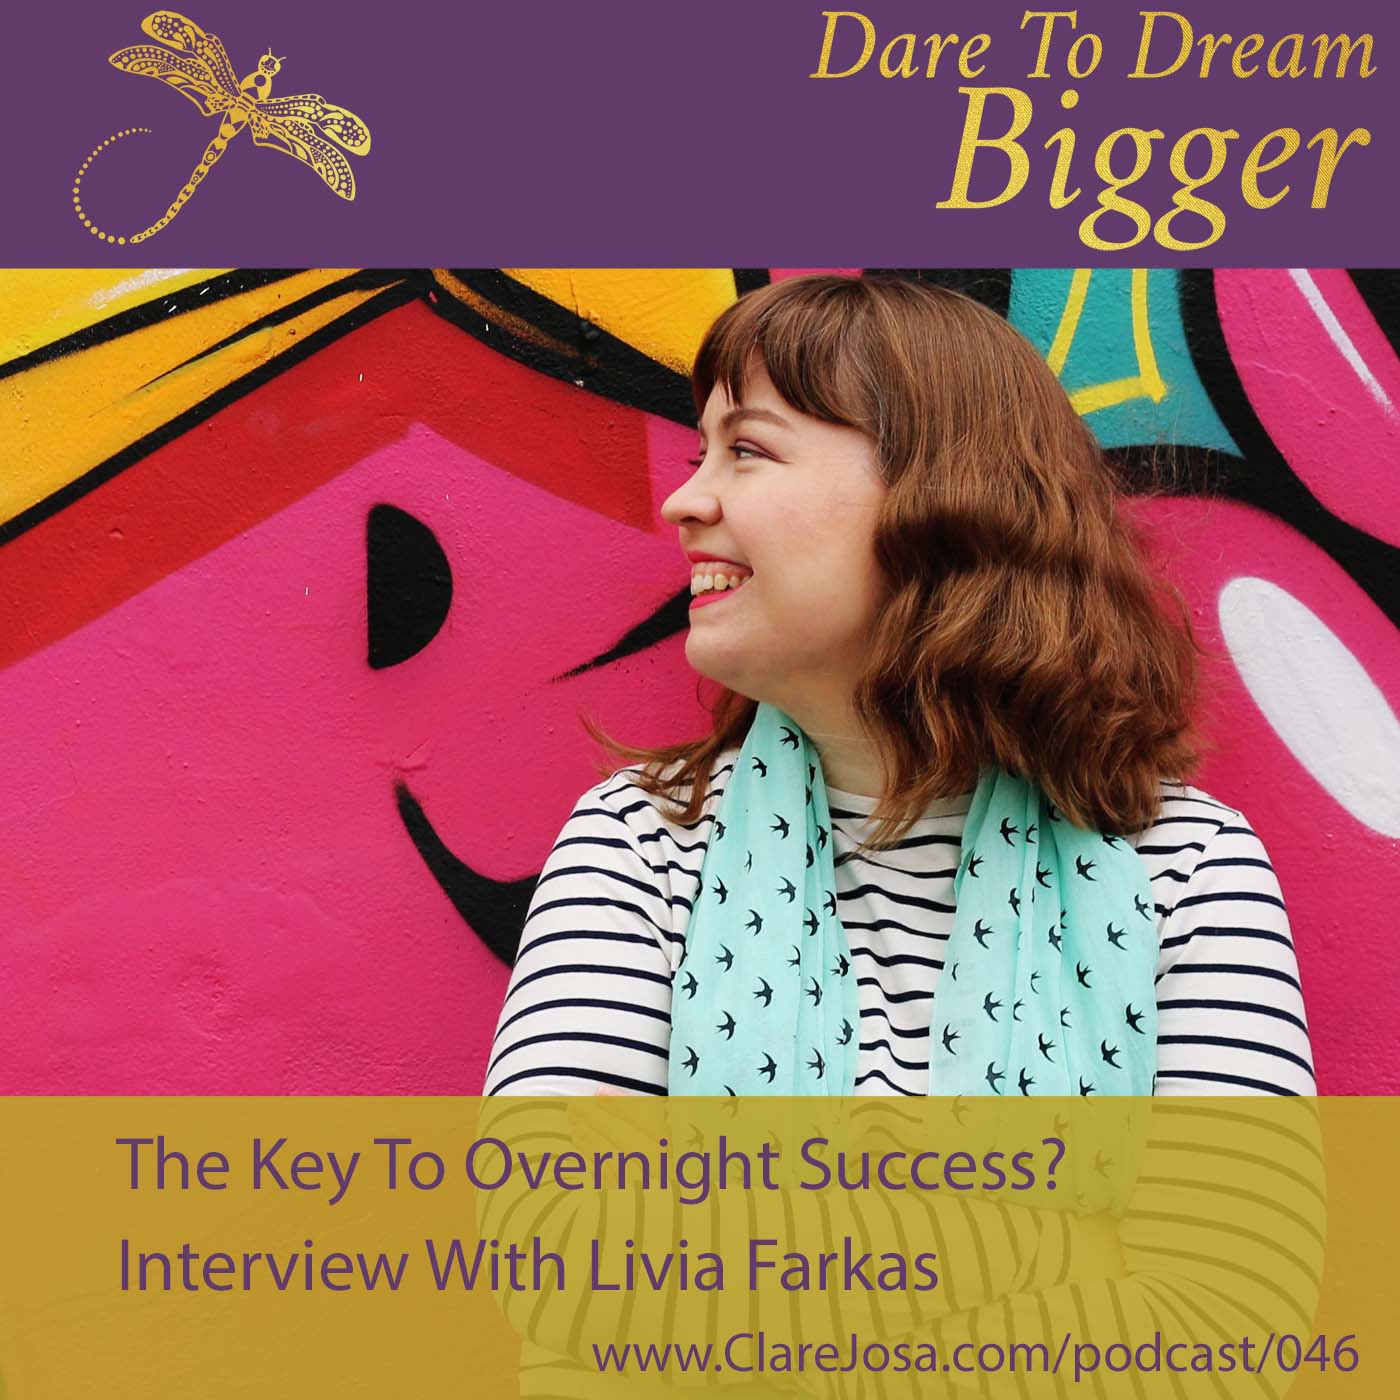 The Key To Overnight Success - Interview With Livia Farkas http://www.clarejosa.com/podcast/046/